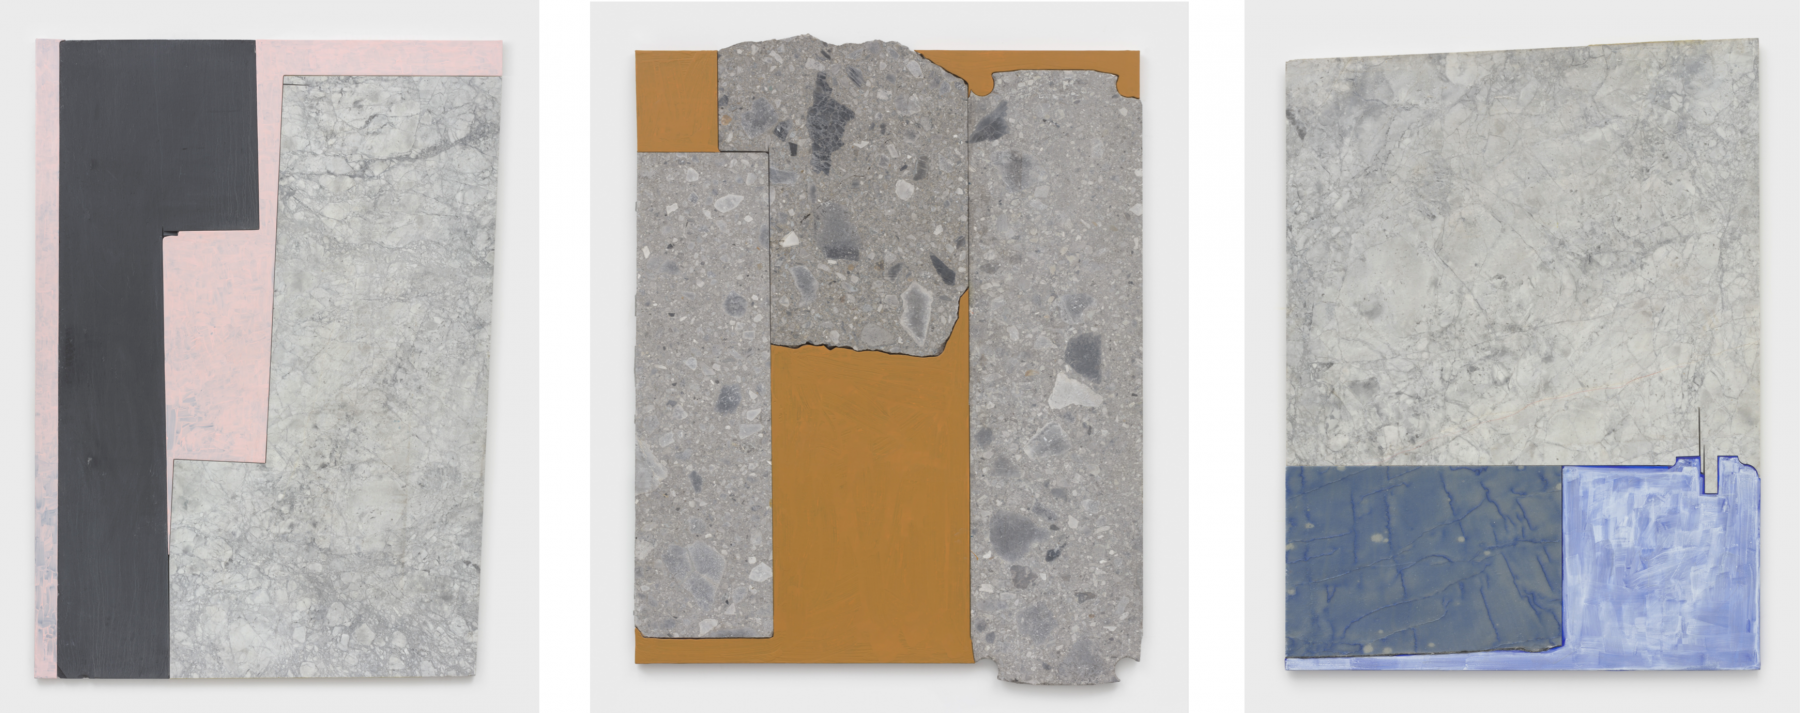 Circle Square, 2021
slate, marble, plaster and hand painted canvas mounted to MDF

83 1/2 x 61 x 1 1/2 inches (212.1 x 154.9 x 3.8 cm) SM-P.21.1425

&nbsp;

Big Secret, 2021
stone, plaster and hand painted canvas mounted to MDF

66 1/2 x 52 1/2 x 1 inches (168.9 x 133.3 x 2.5 cm) SM-P.21.1424

&nbsp;

April City, 2021
marble, plaster and hand painted canvas mounted to MDF

51 x 38 x 1 inches (129.5 x 96.5 x 2.5 cm) SM-P.21.1426